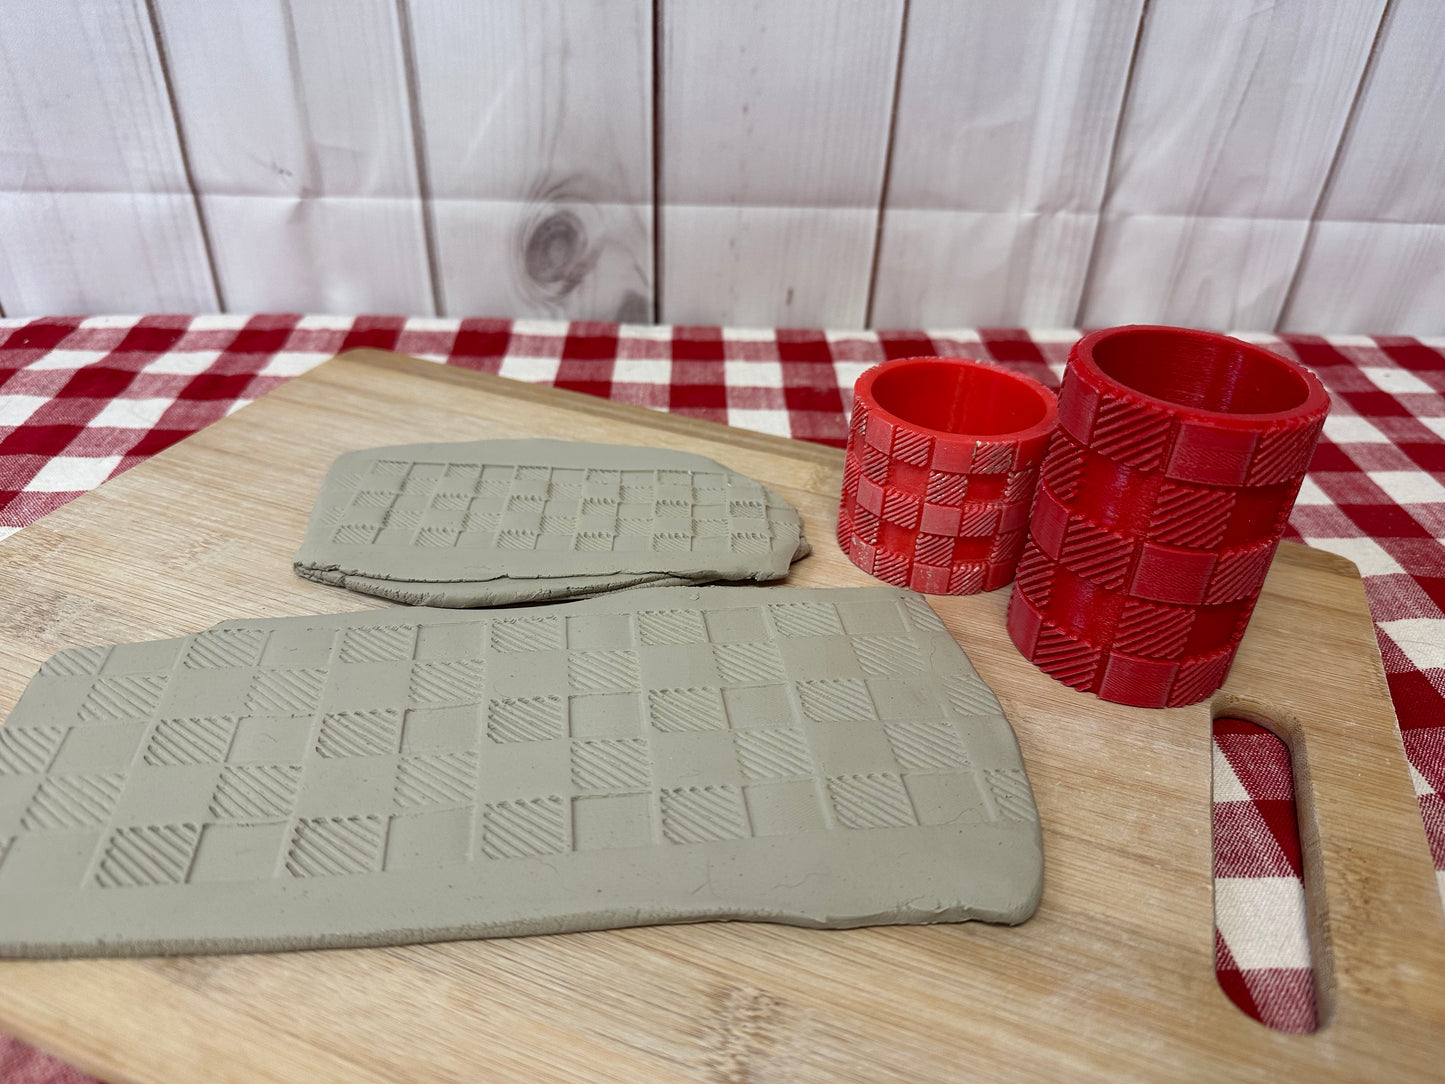 Buffalo Plaid/Gingham Check Pottery Roller - Now in 2 sizes! Border Stamp, Repeating pattern, Plastic 3d printed